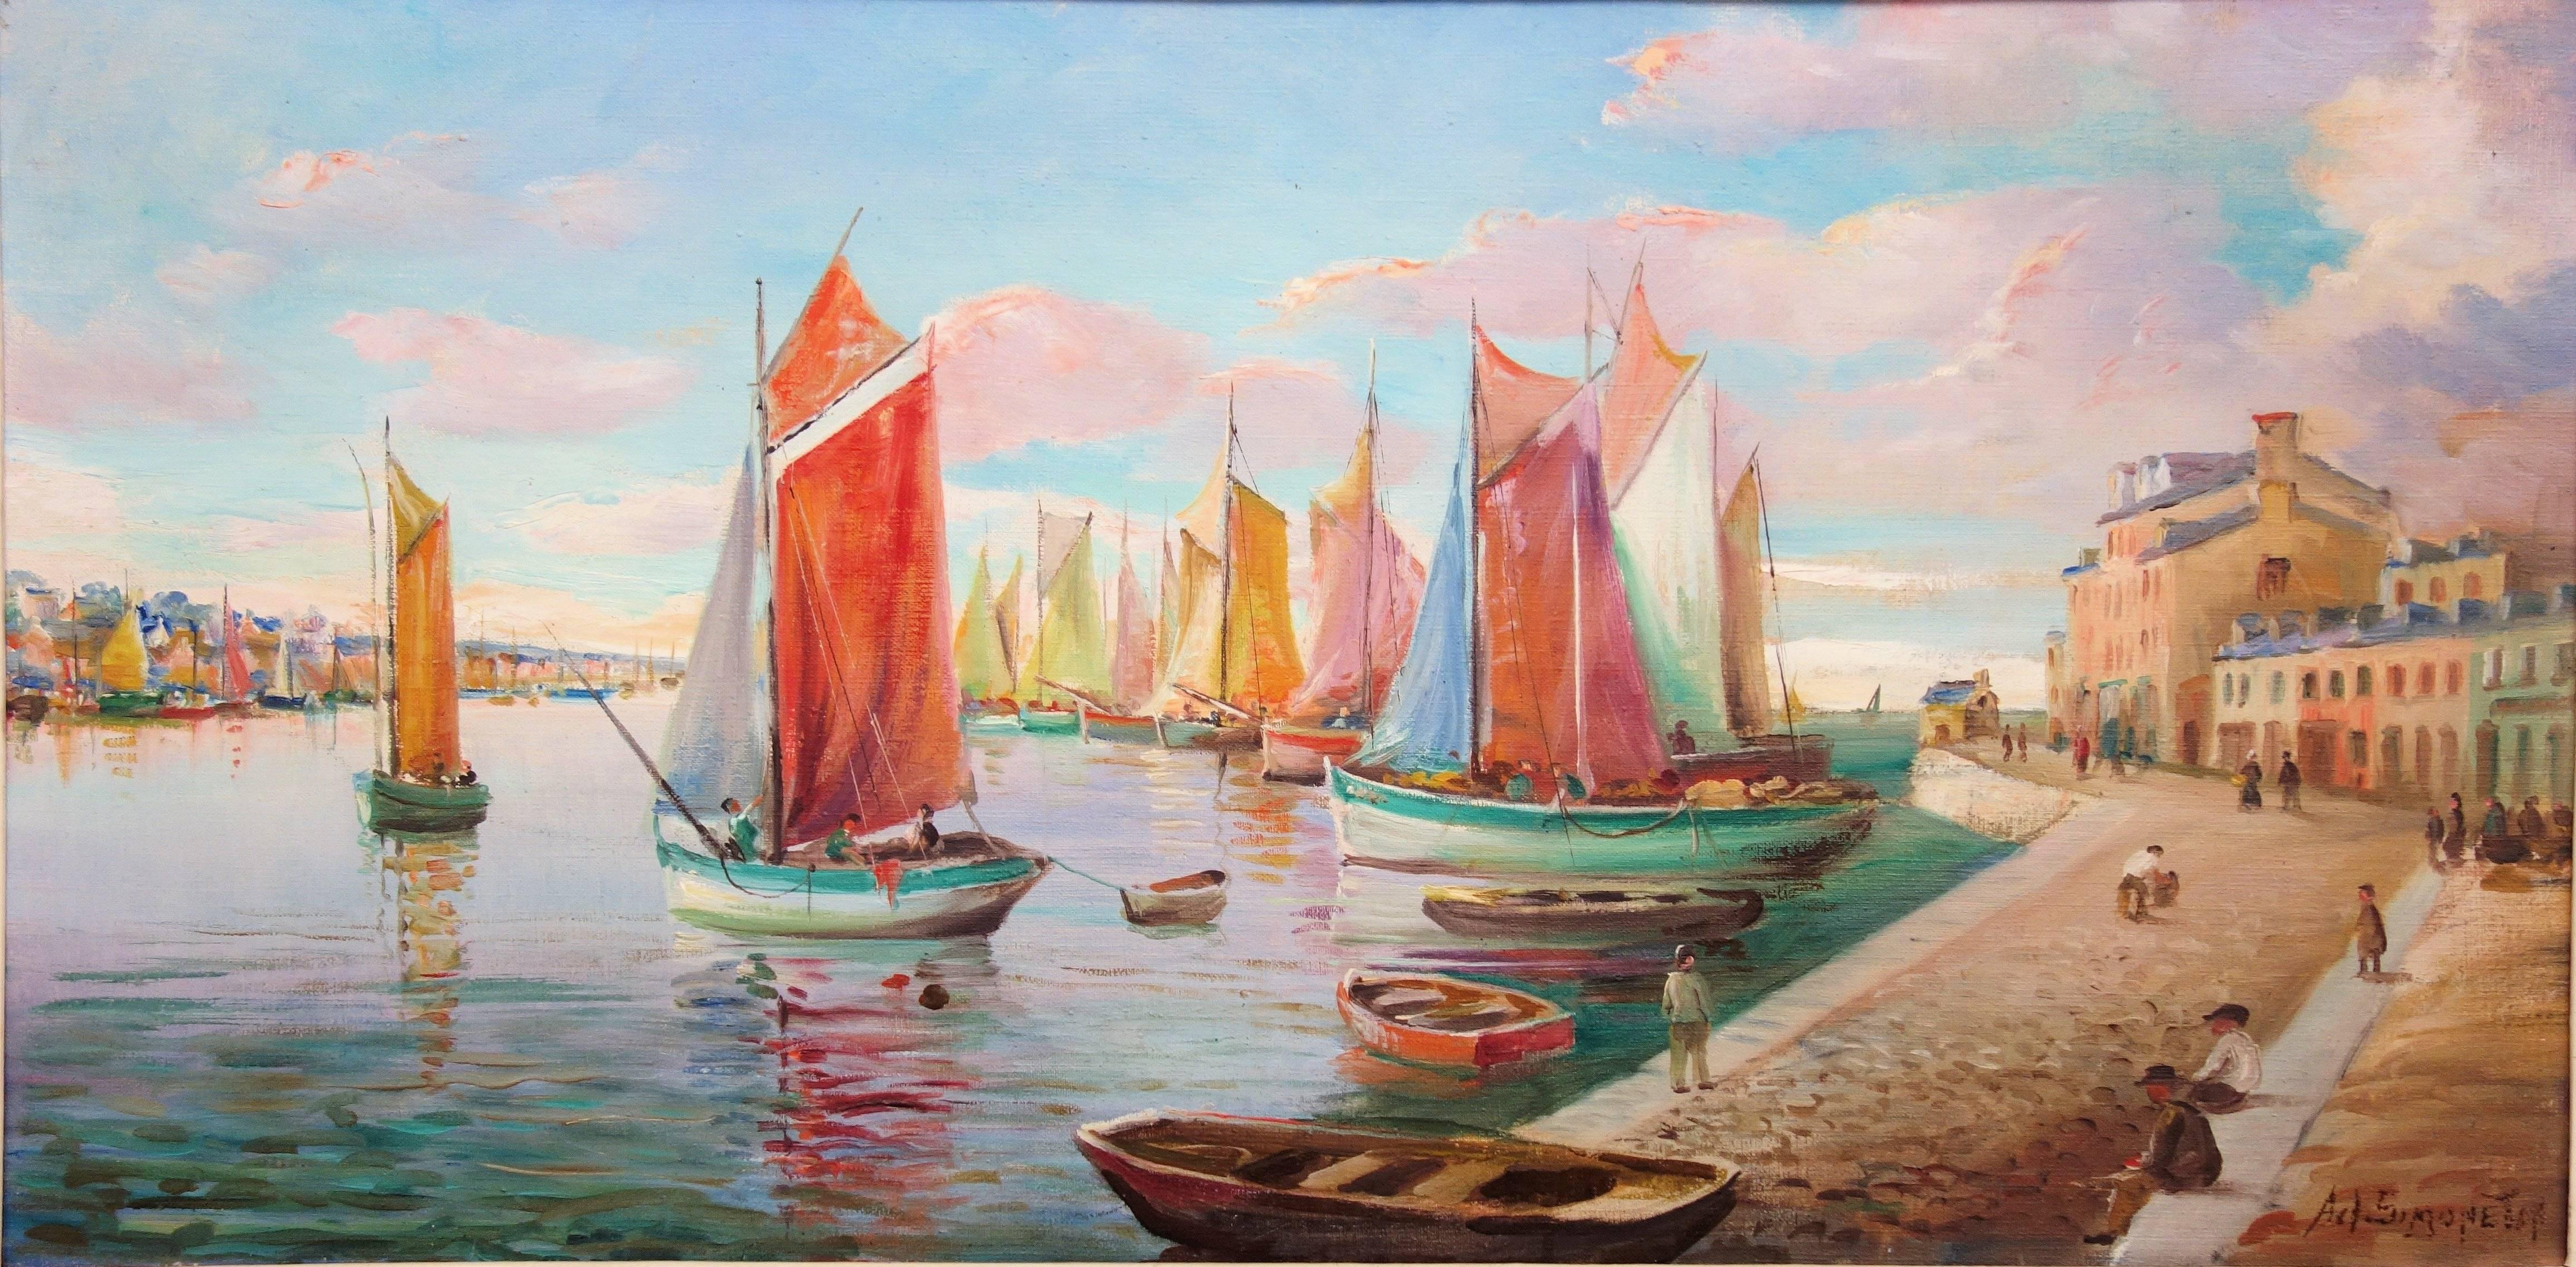 Harbour in the Early Morning - Signed oil on canvas - Framed - Painting by Adrien Simoneton